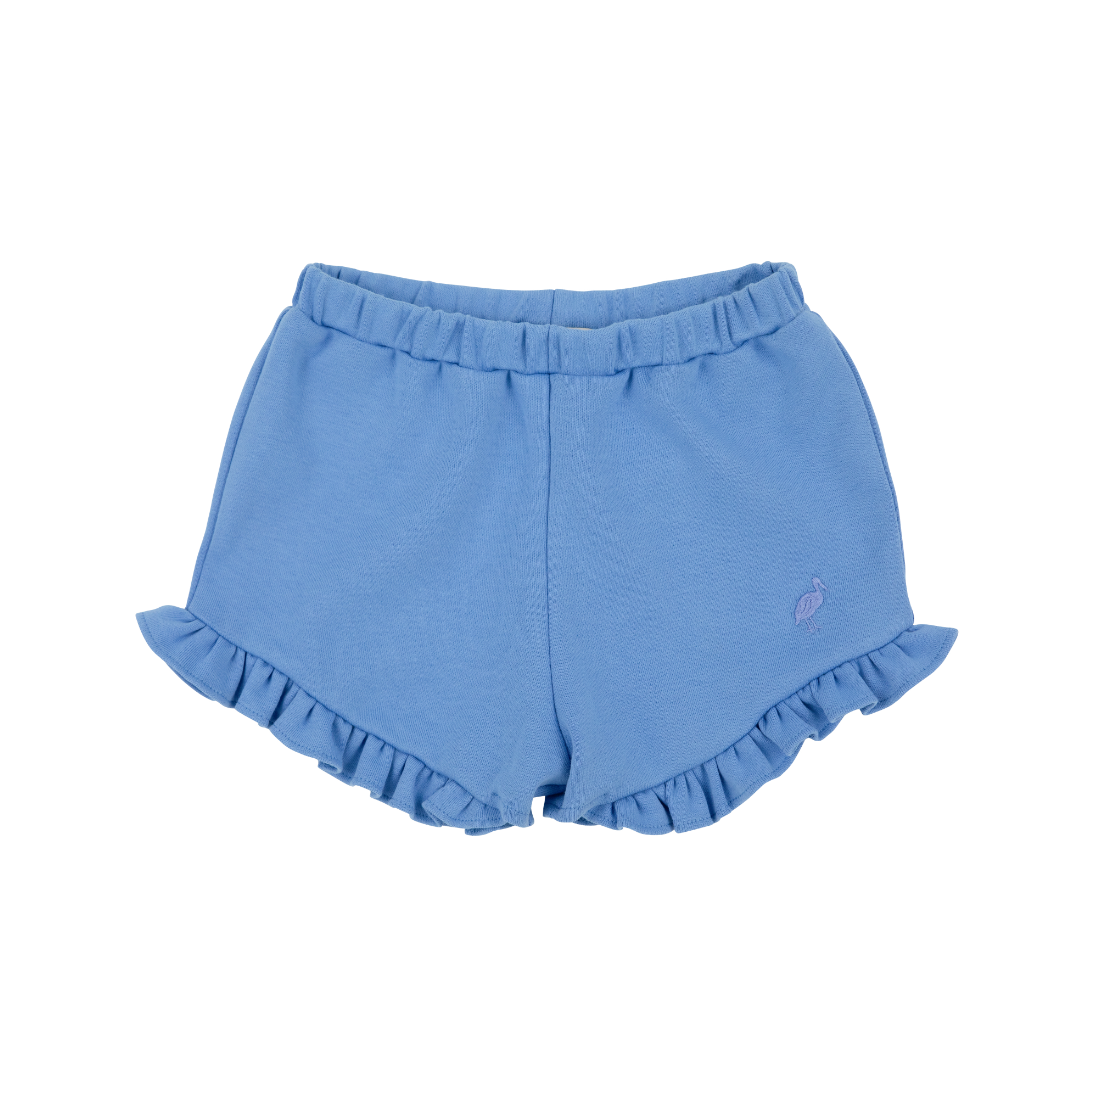 TBBC: Shelby Anne Shorts - Barbados Blue